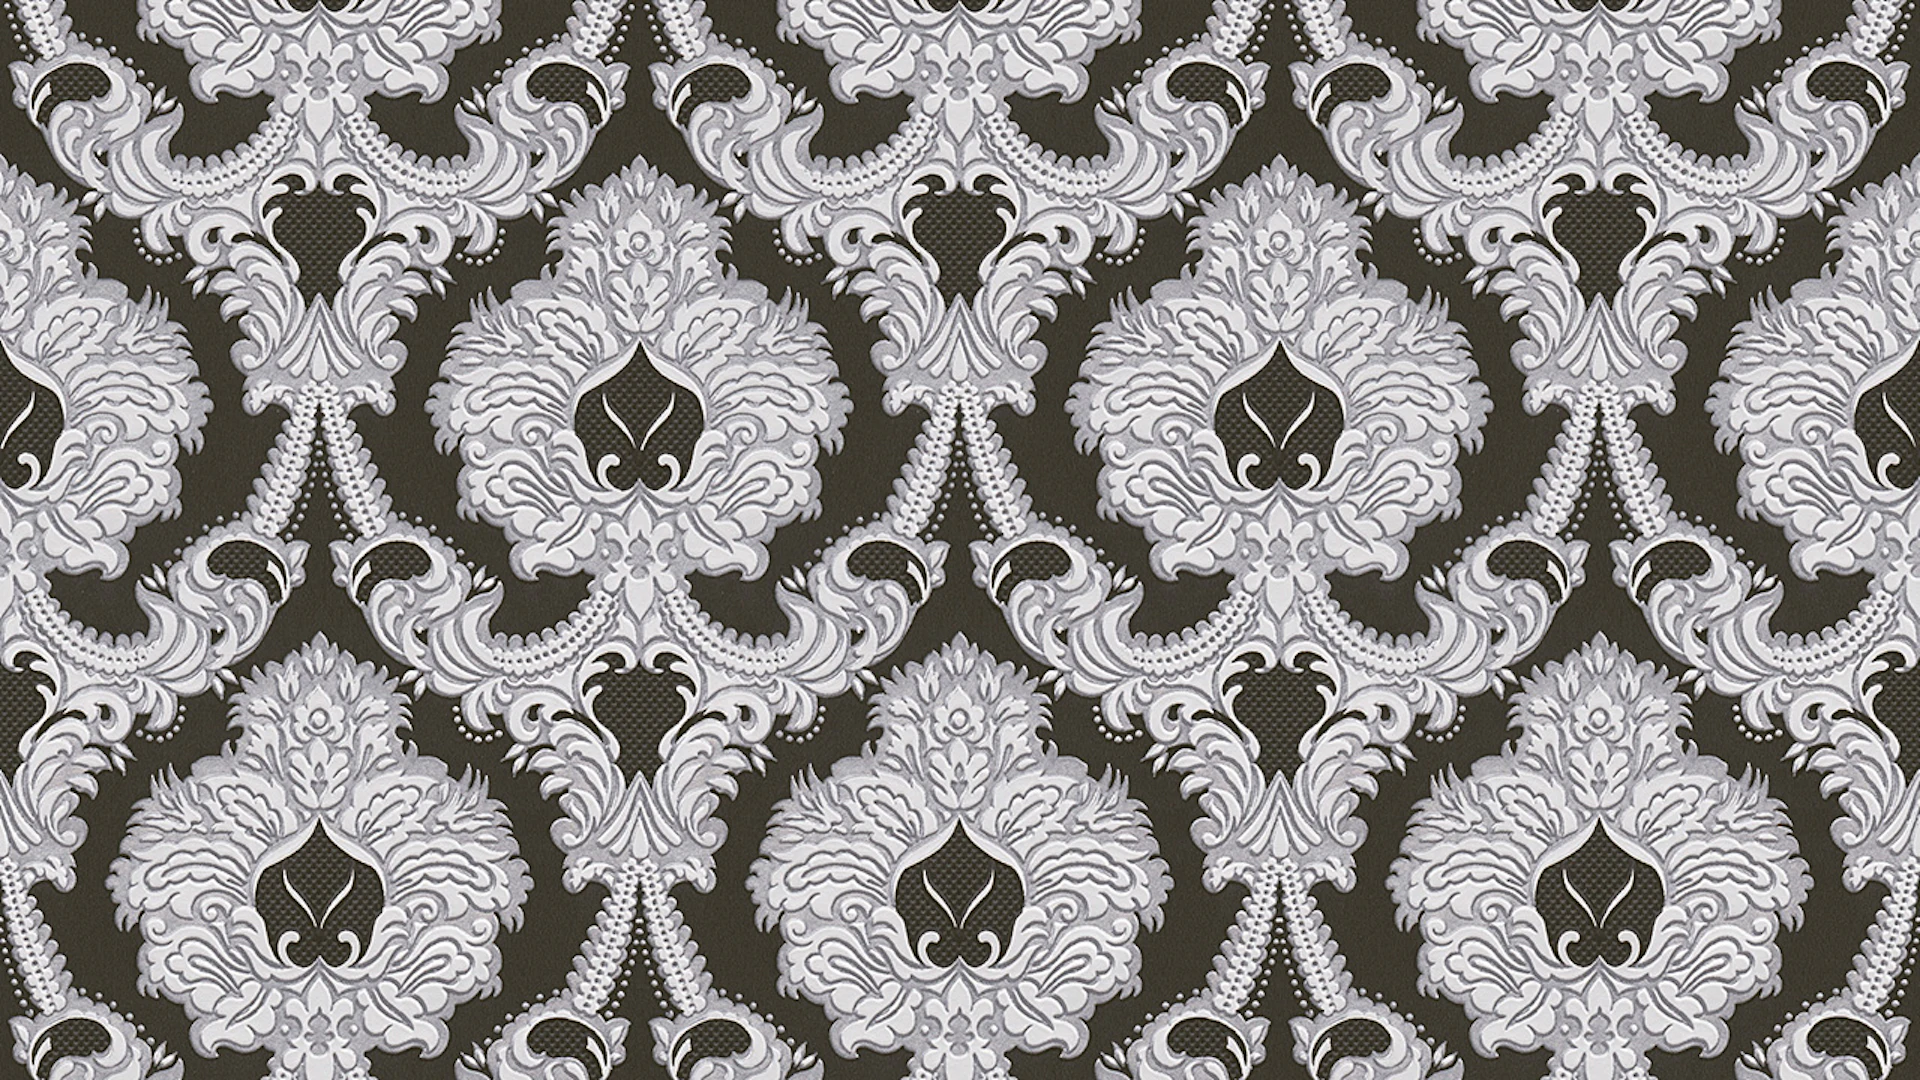 Paper-backing wallpaper stone wallpaper grey baroque country house retro stones style guide classic 2021 347